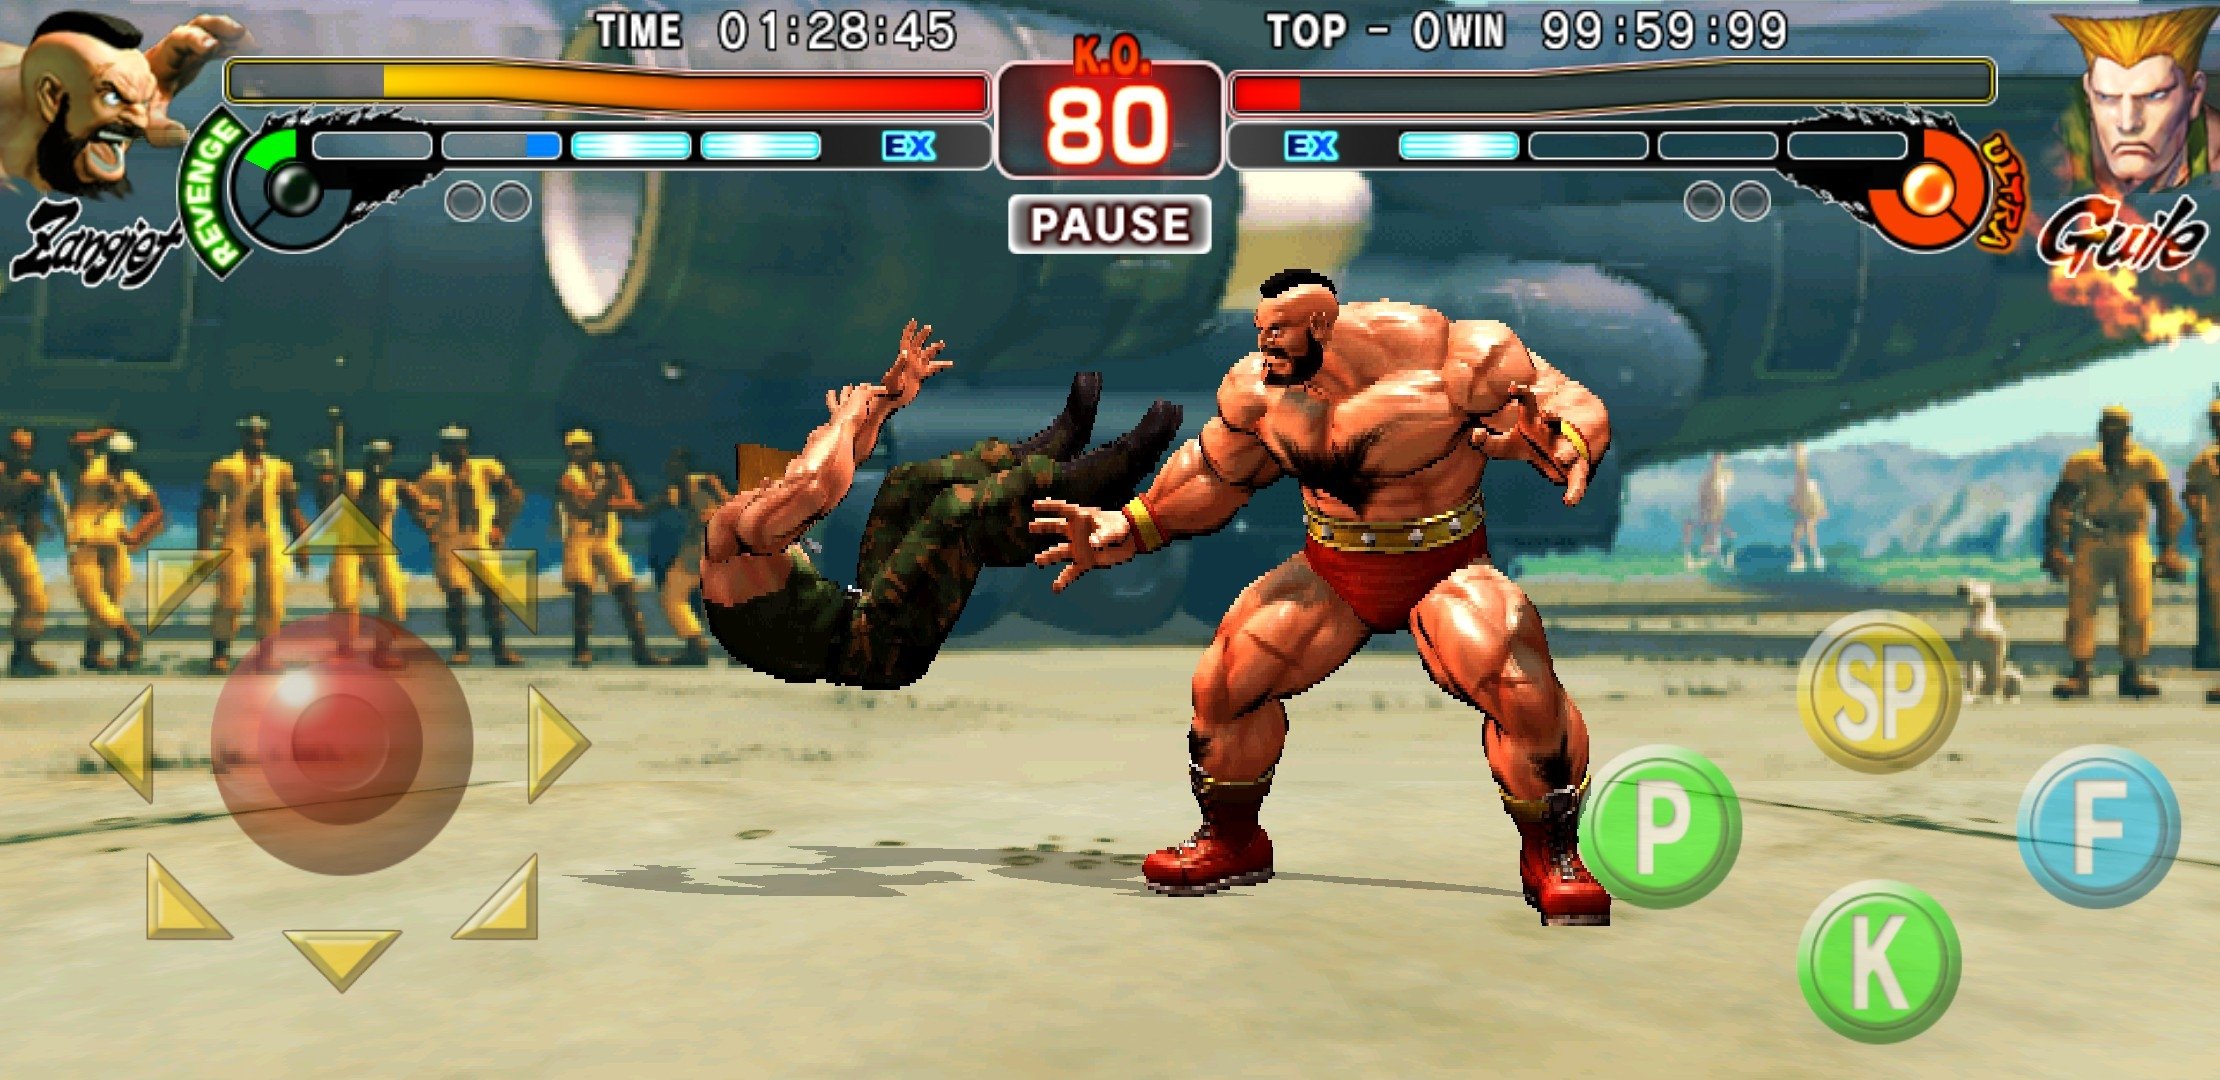 Street Fighter Champion Edition 1.03.01 - Download for Android APK Free